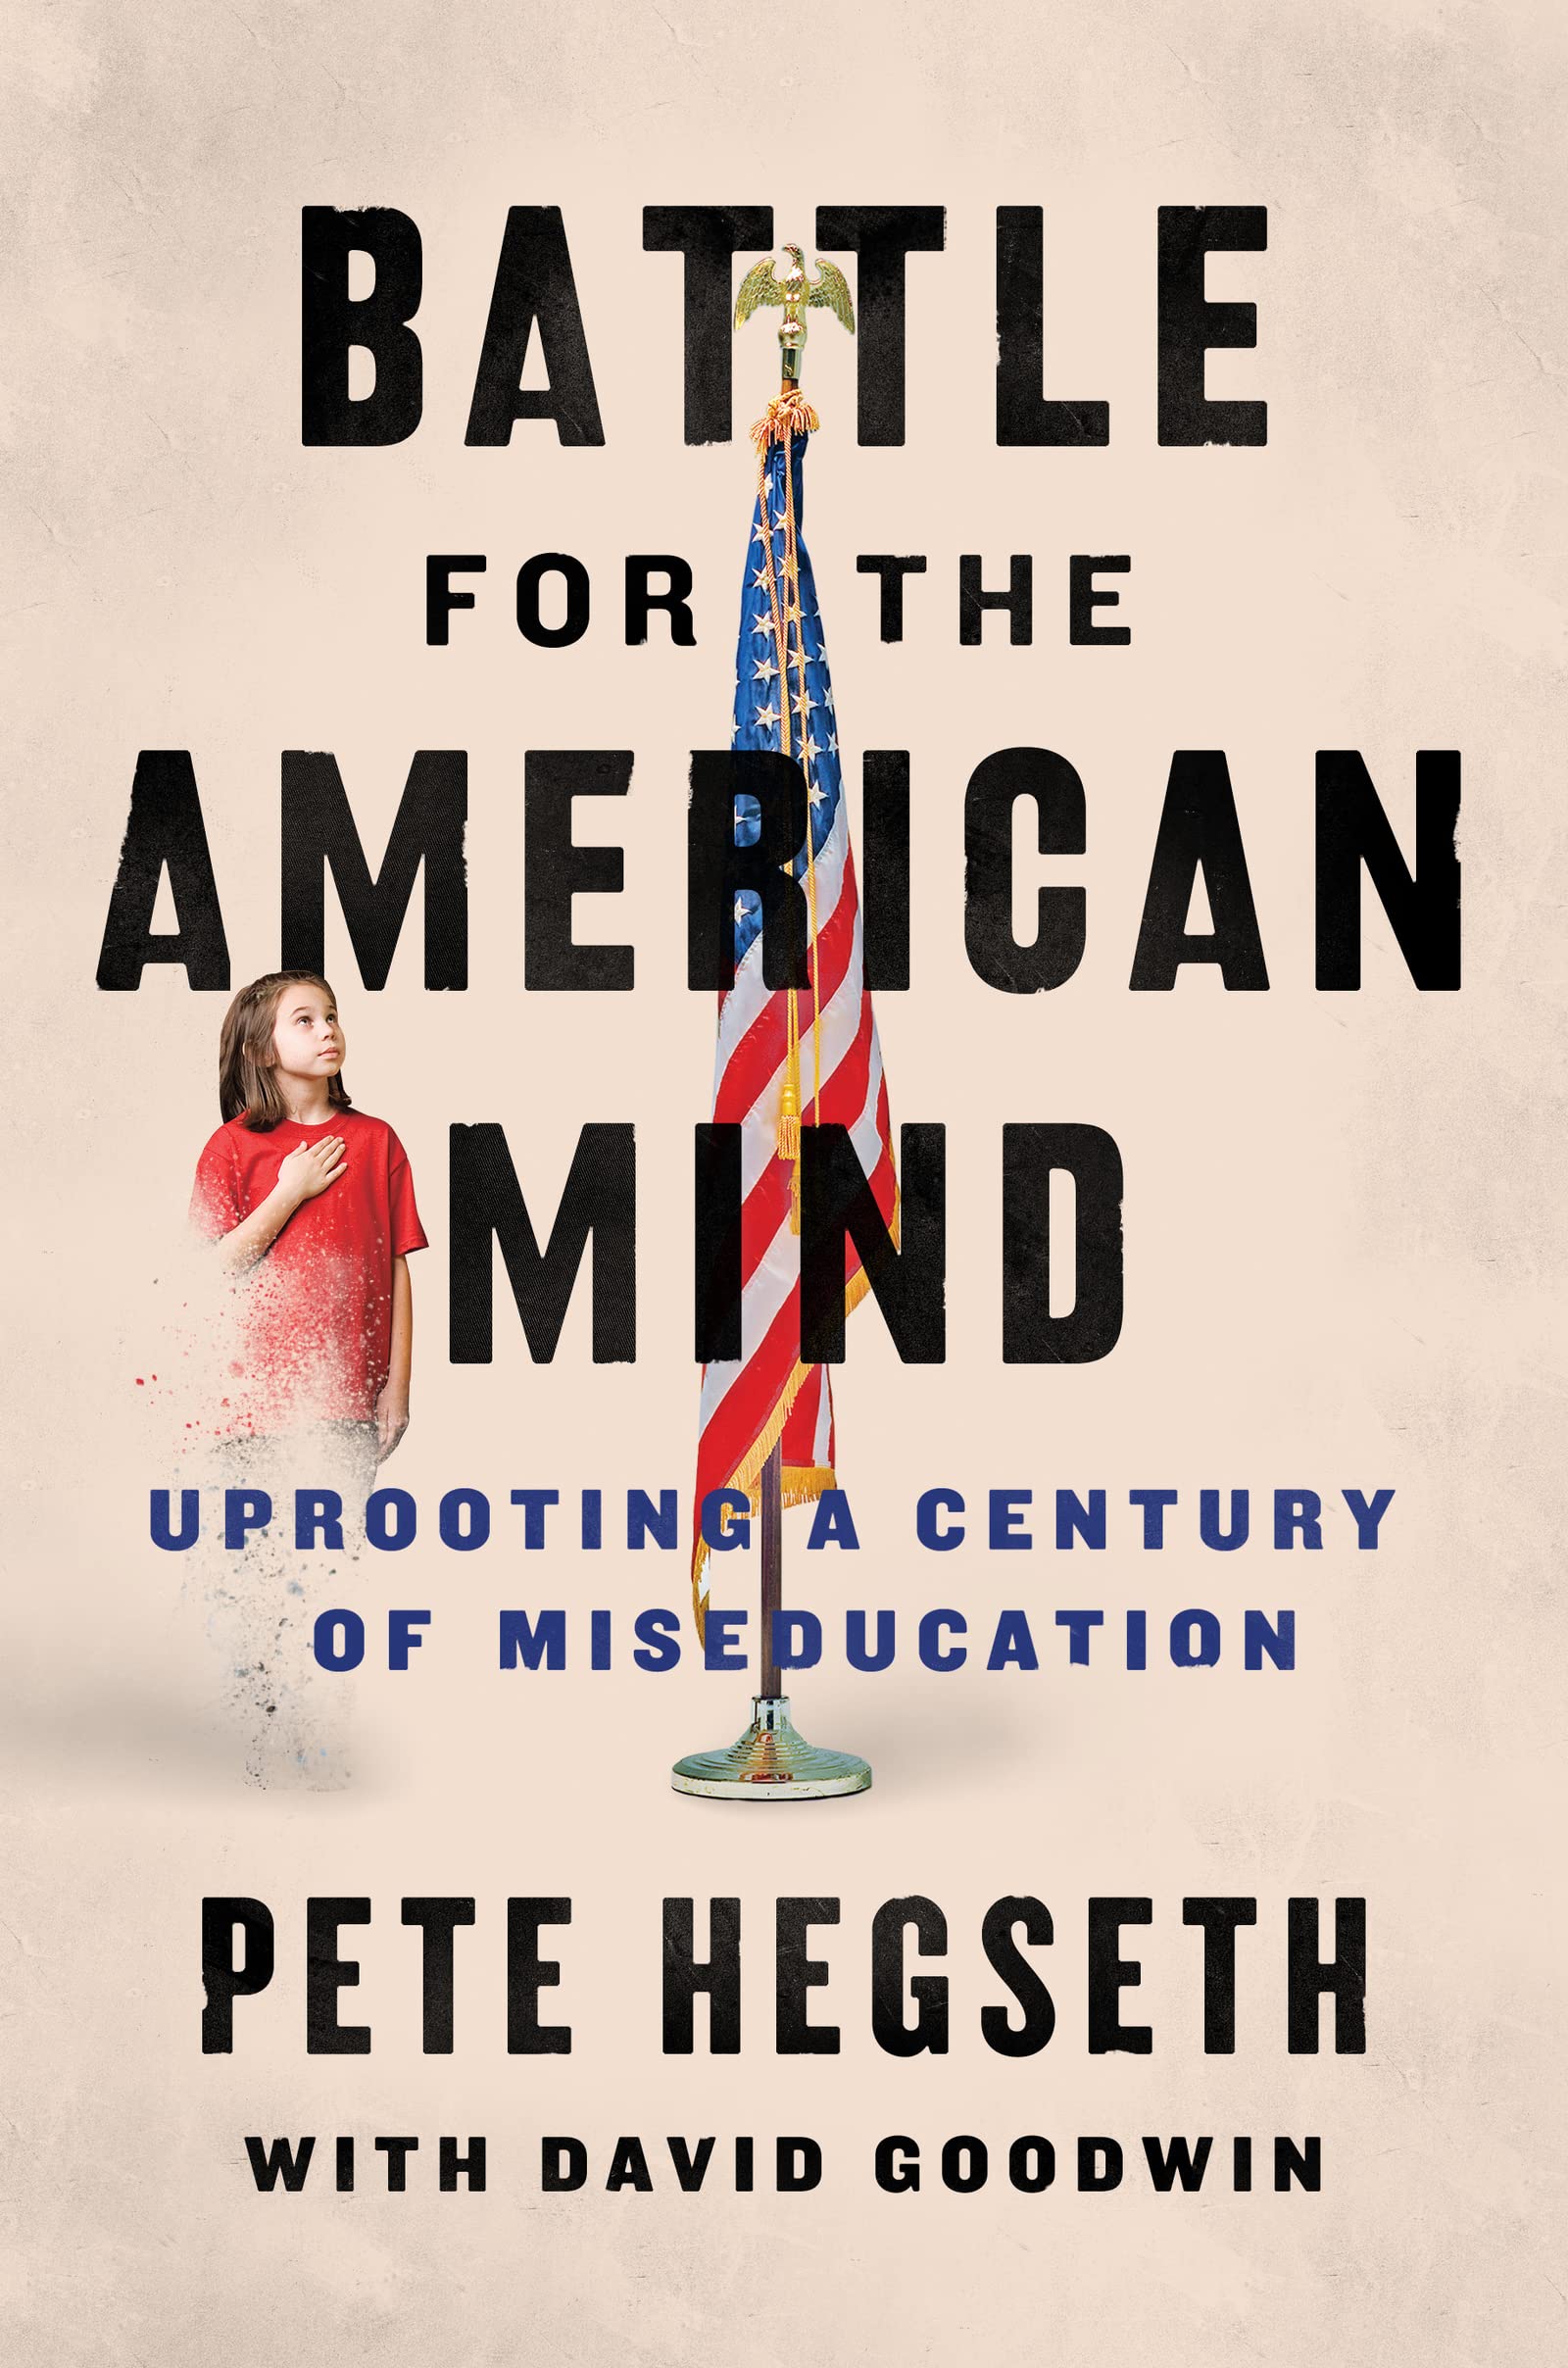 Battle for the American Mind: Uprooting a Century of Miseducation (Hardcover)